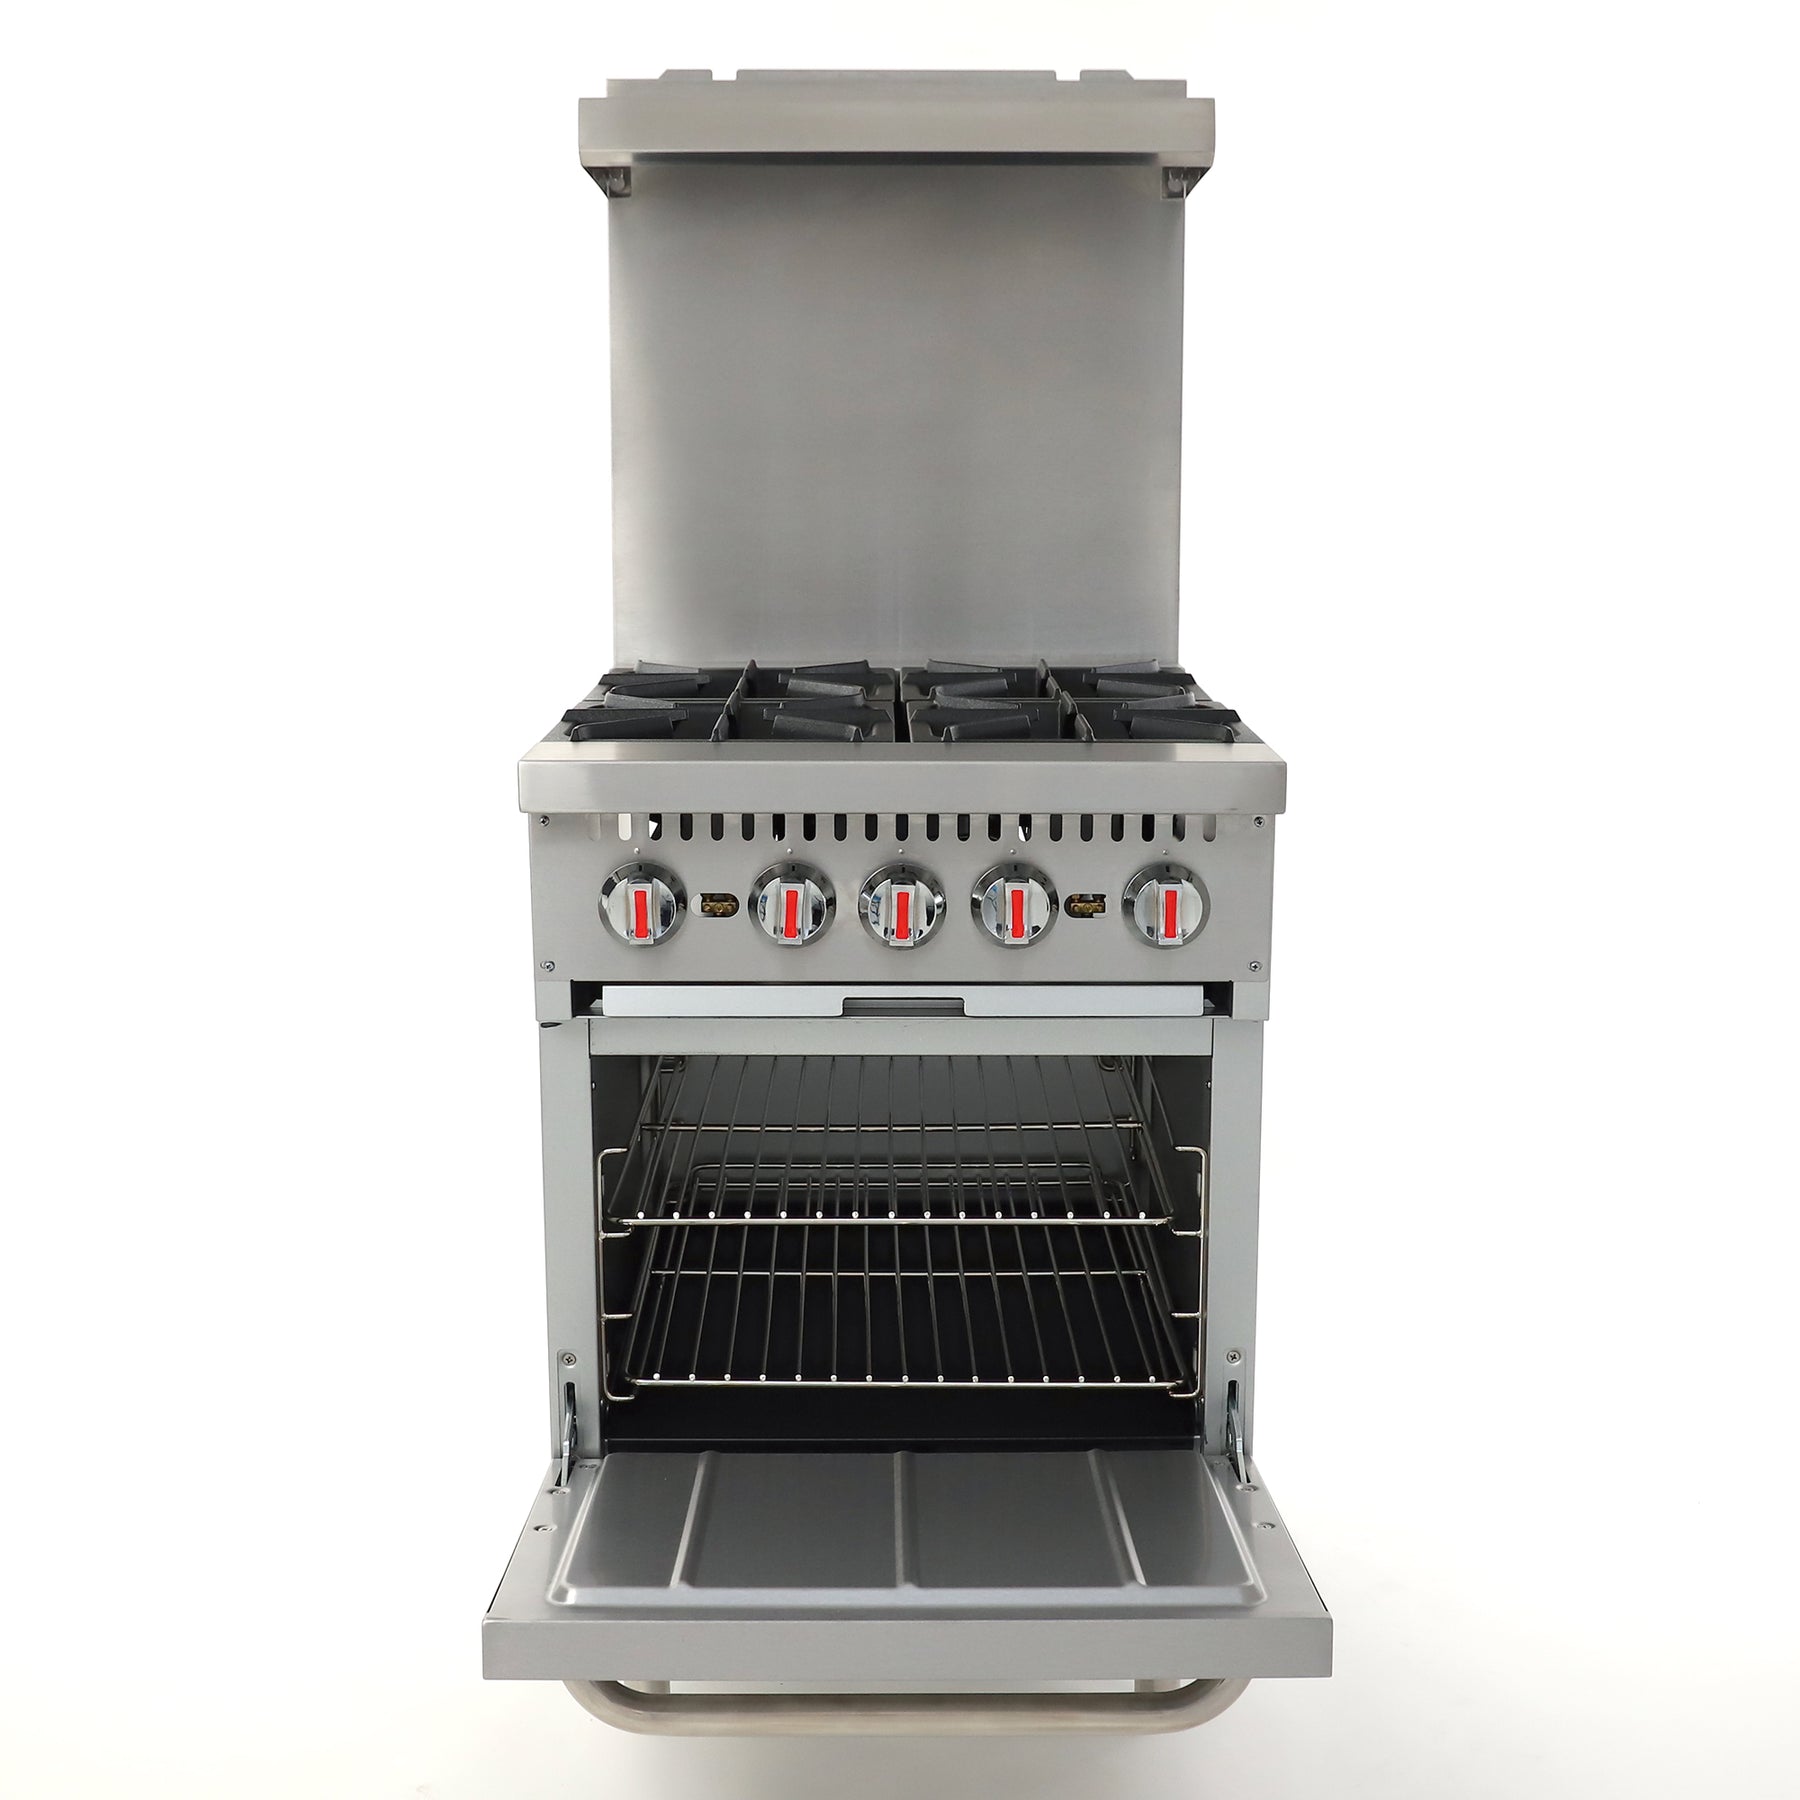 Griddles for Cooking 24/ Flat Top Grill GCMG-48 - General Food Service